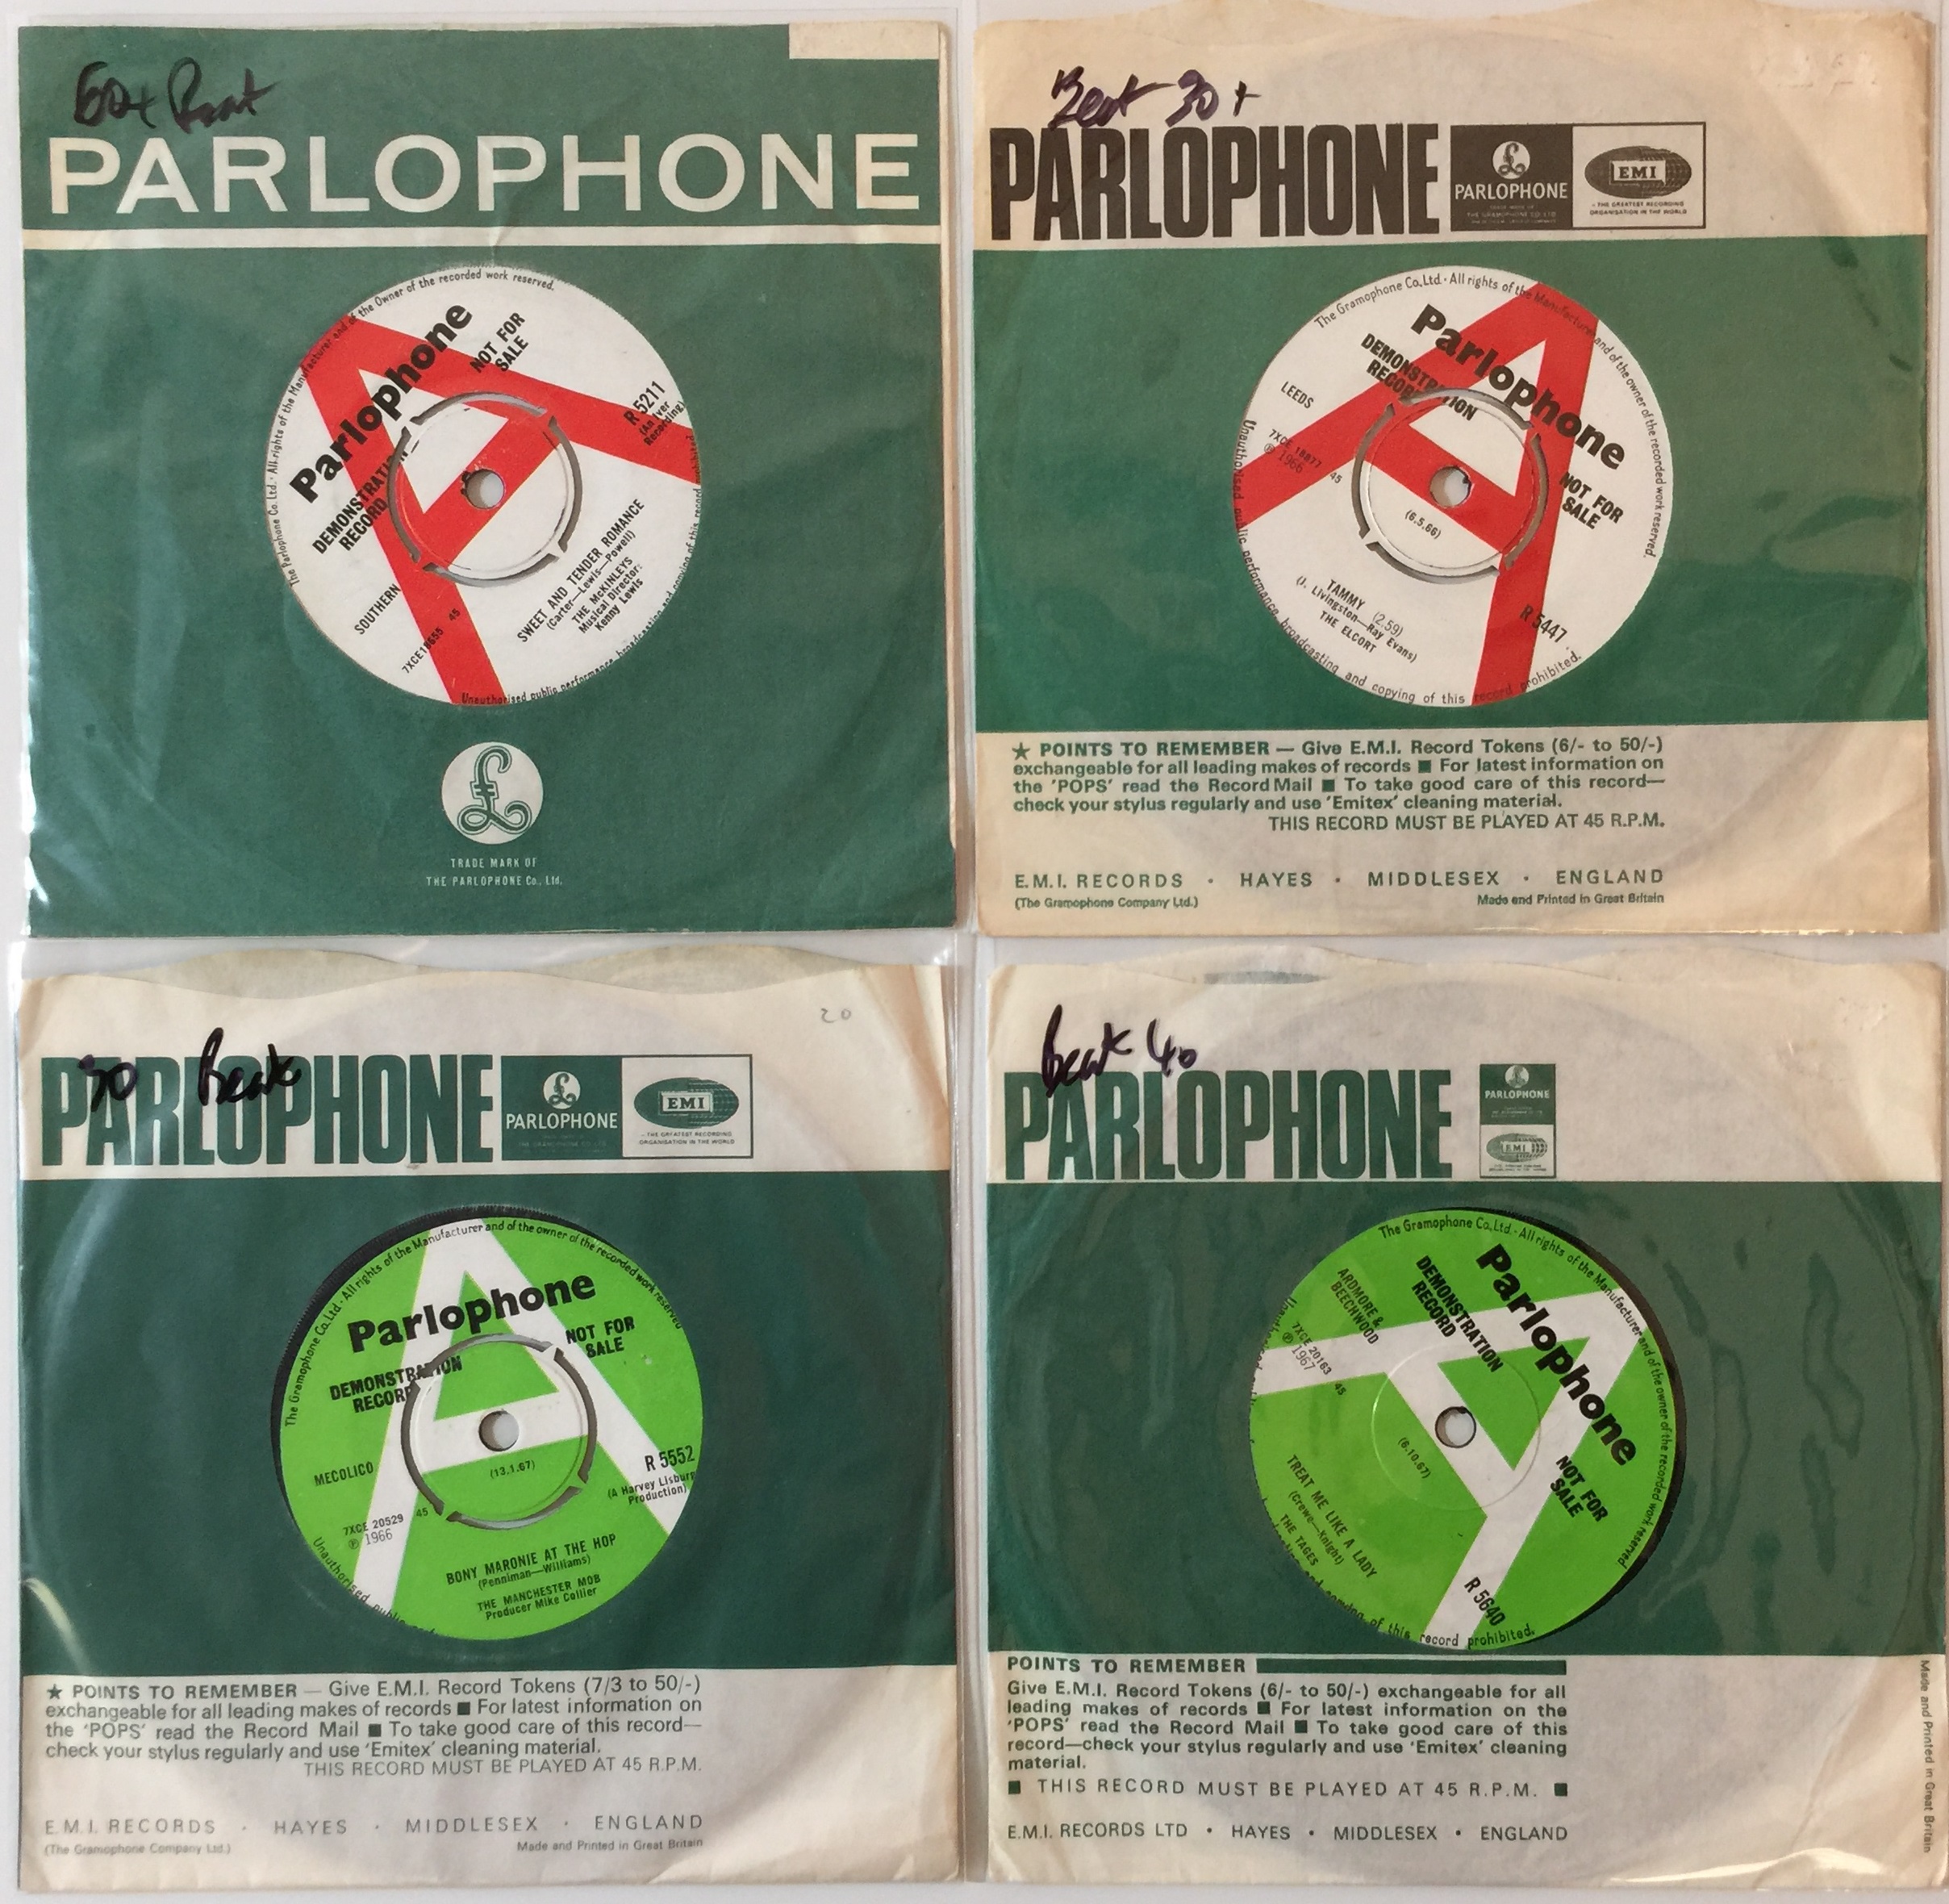 PARLOPHONE 7" COLLECTION - 60s BEAT DEMOS. Wicked selection of 4 x original UK Parlophone 7" demos.